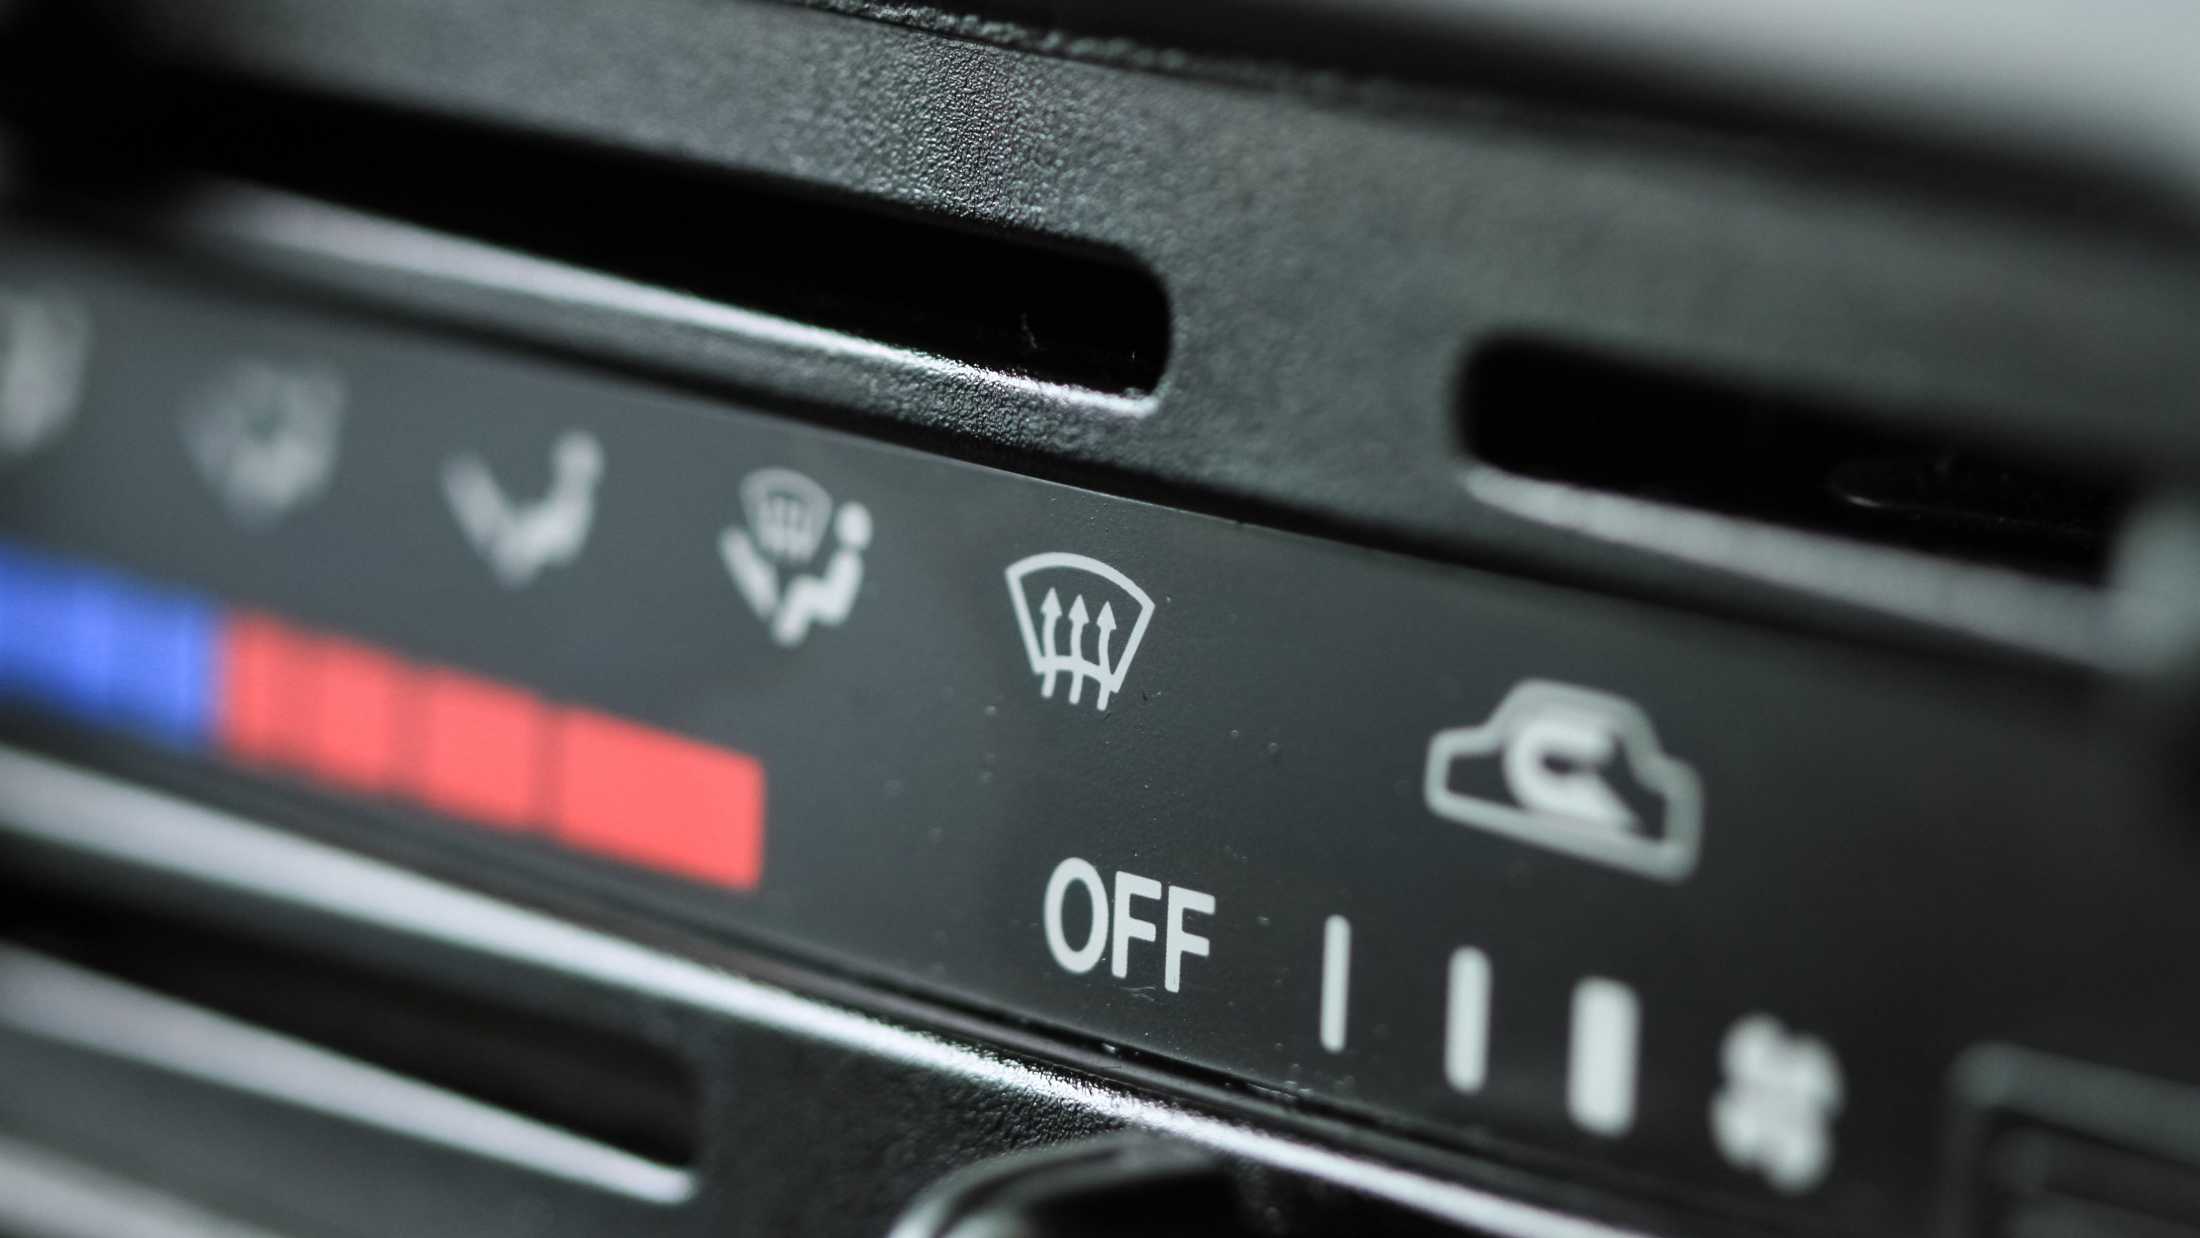 Heating and air conditioning controls on a car dashboard